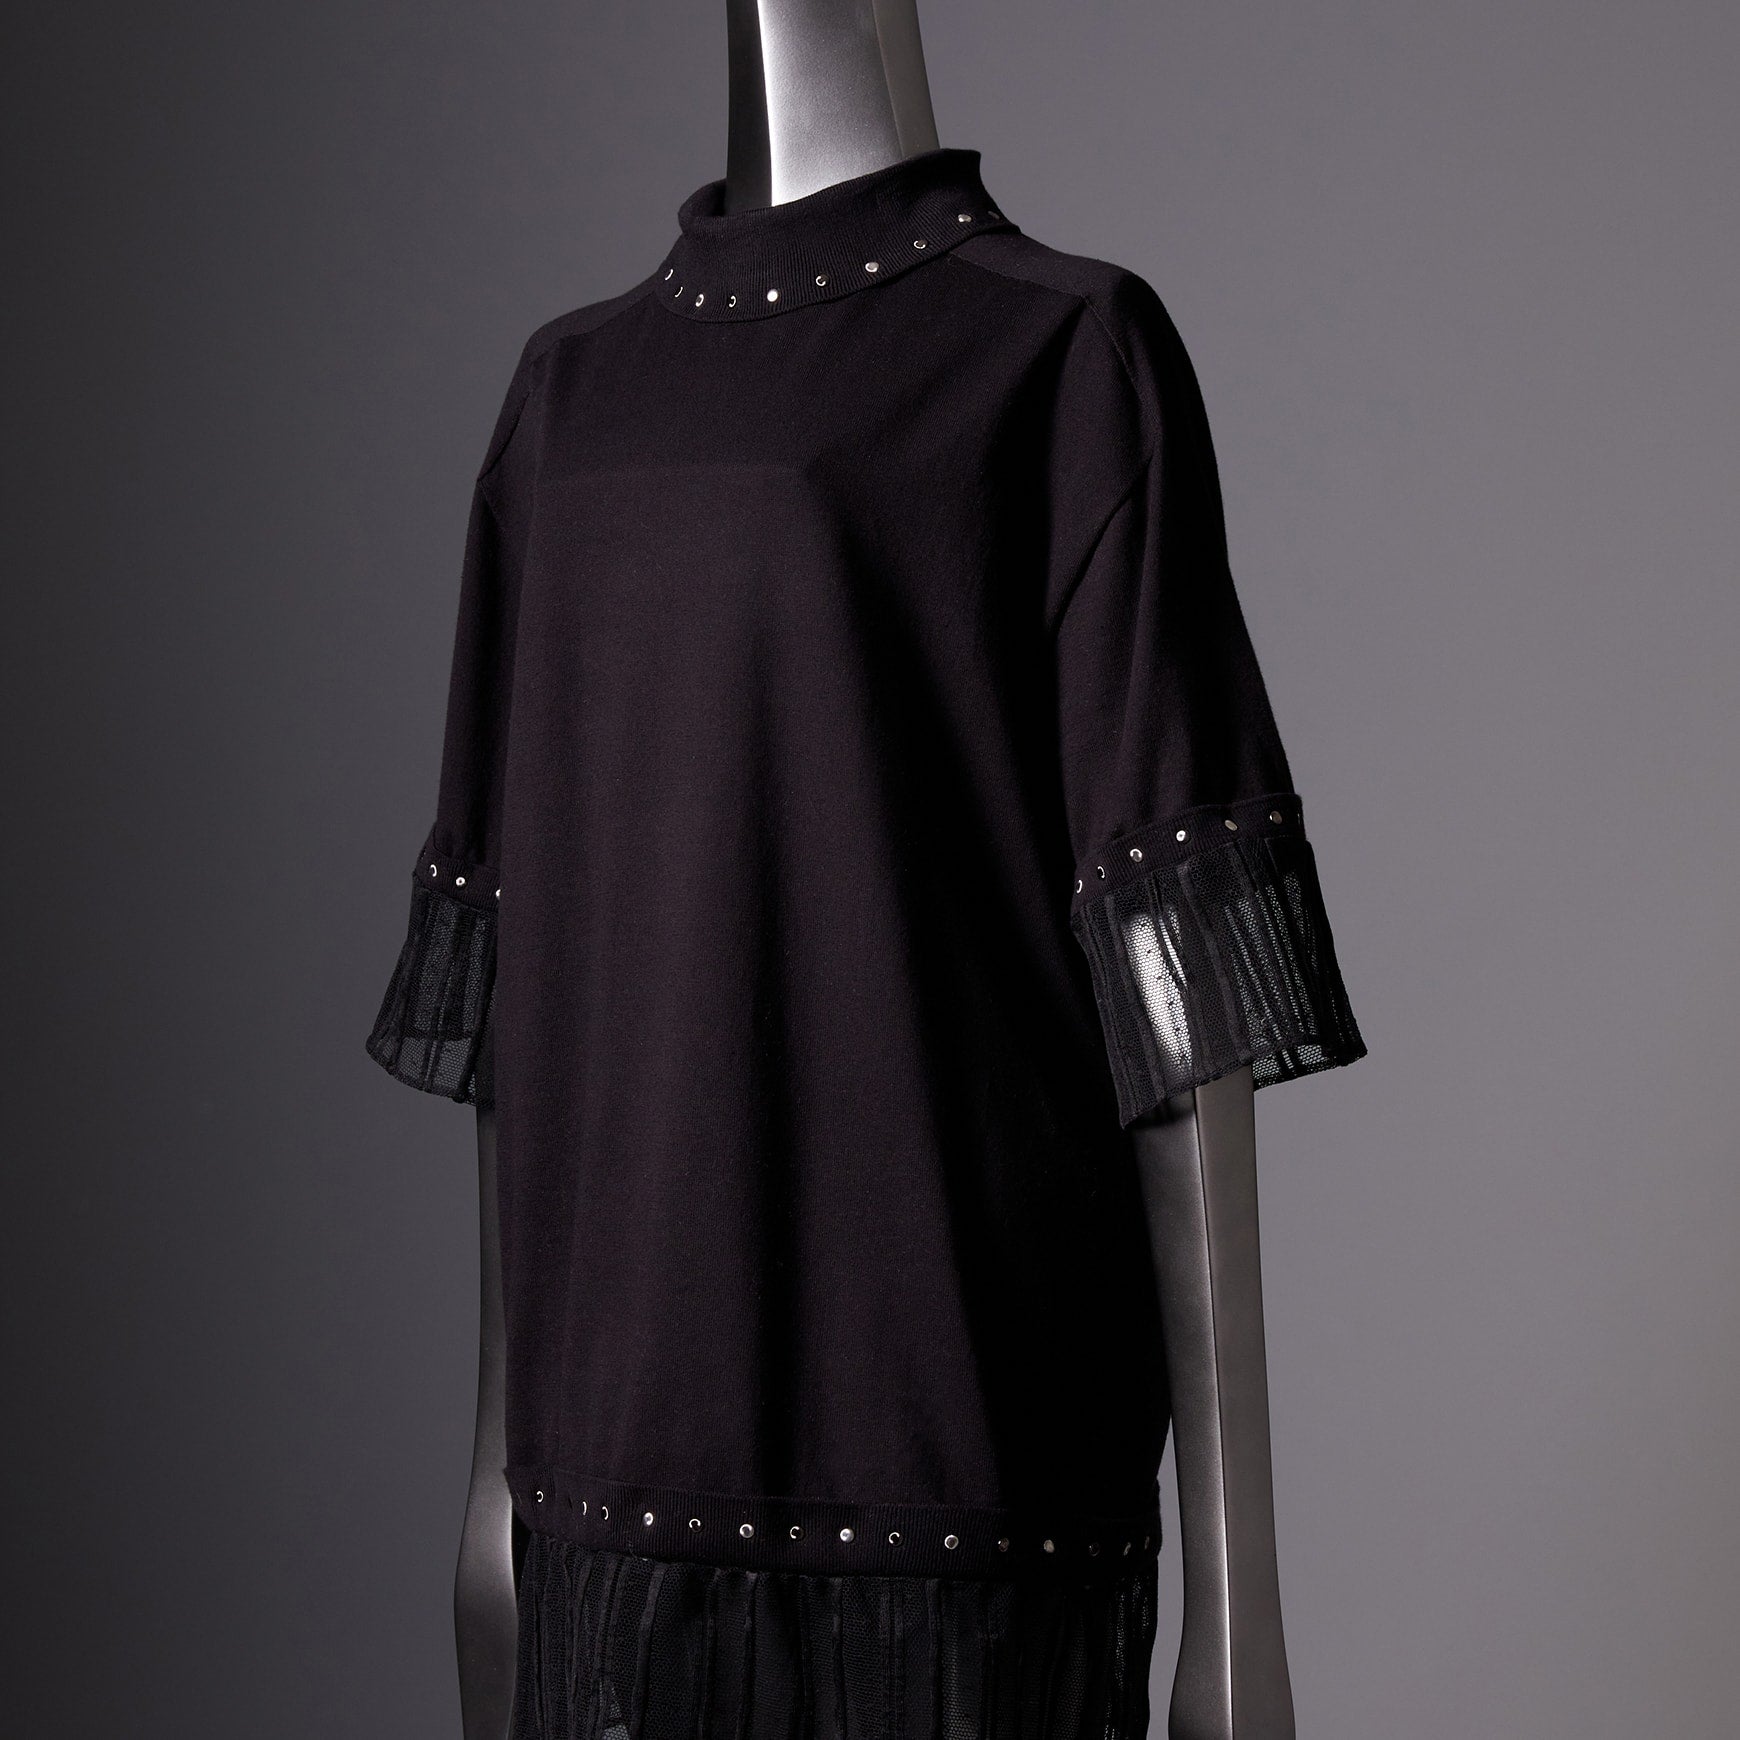 TYPE-1 Knit Organic Cotton Half Sleeves with French Lace Sleeve Parts Short (Black Stripes)